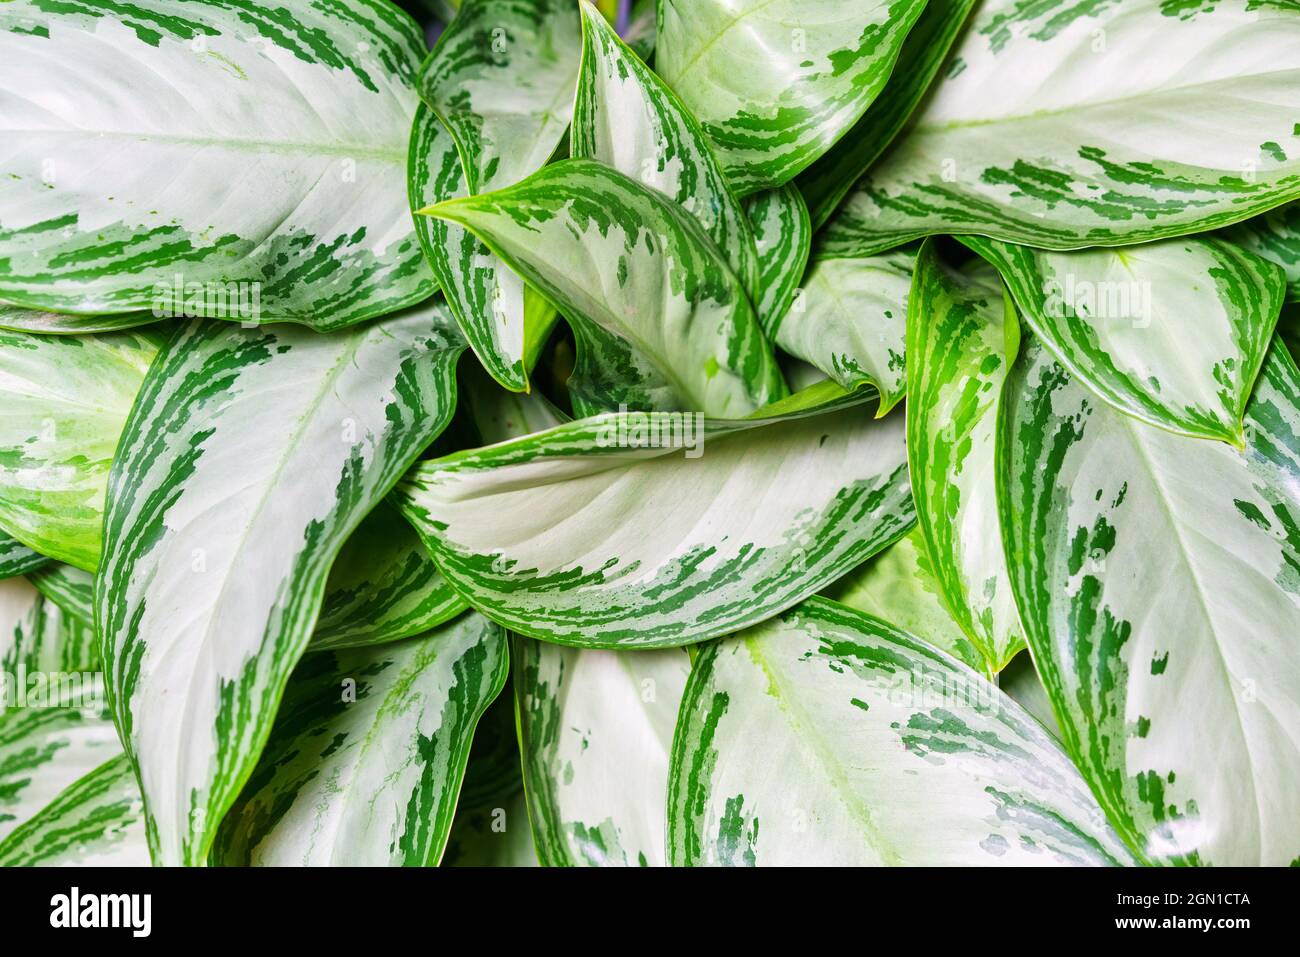 Aglaonema silver bay as a natural background of green leaves with white spots. Indoor plant close up view from above Stock Photo